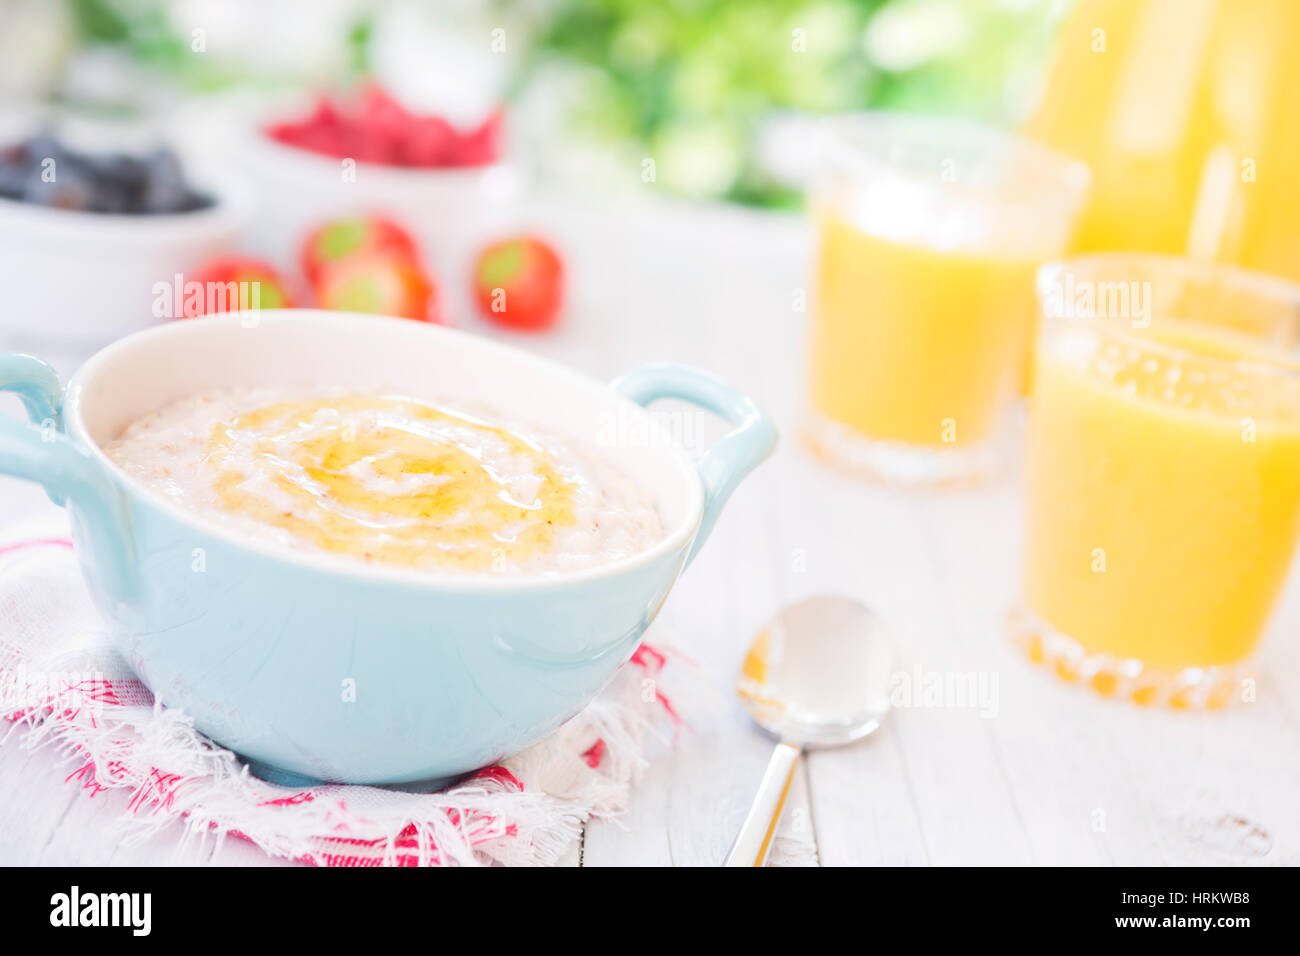 A bowl with homemade oatmeal porridge with honey on a rustic outdoor table. Stock Photo